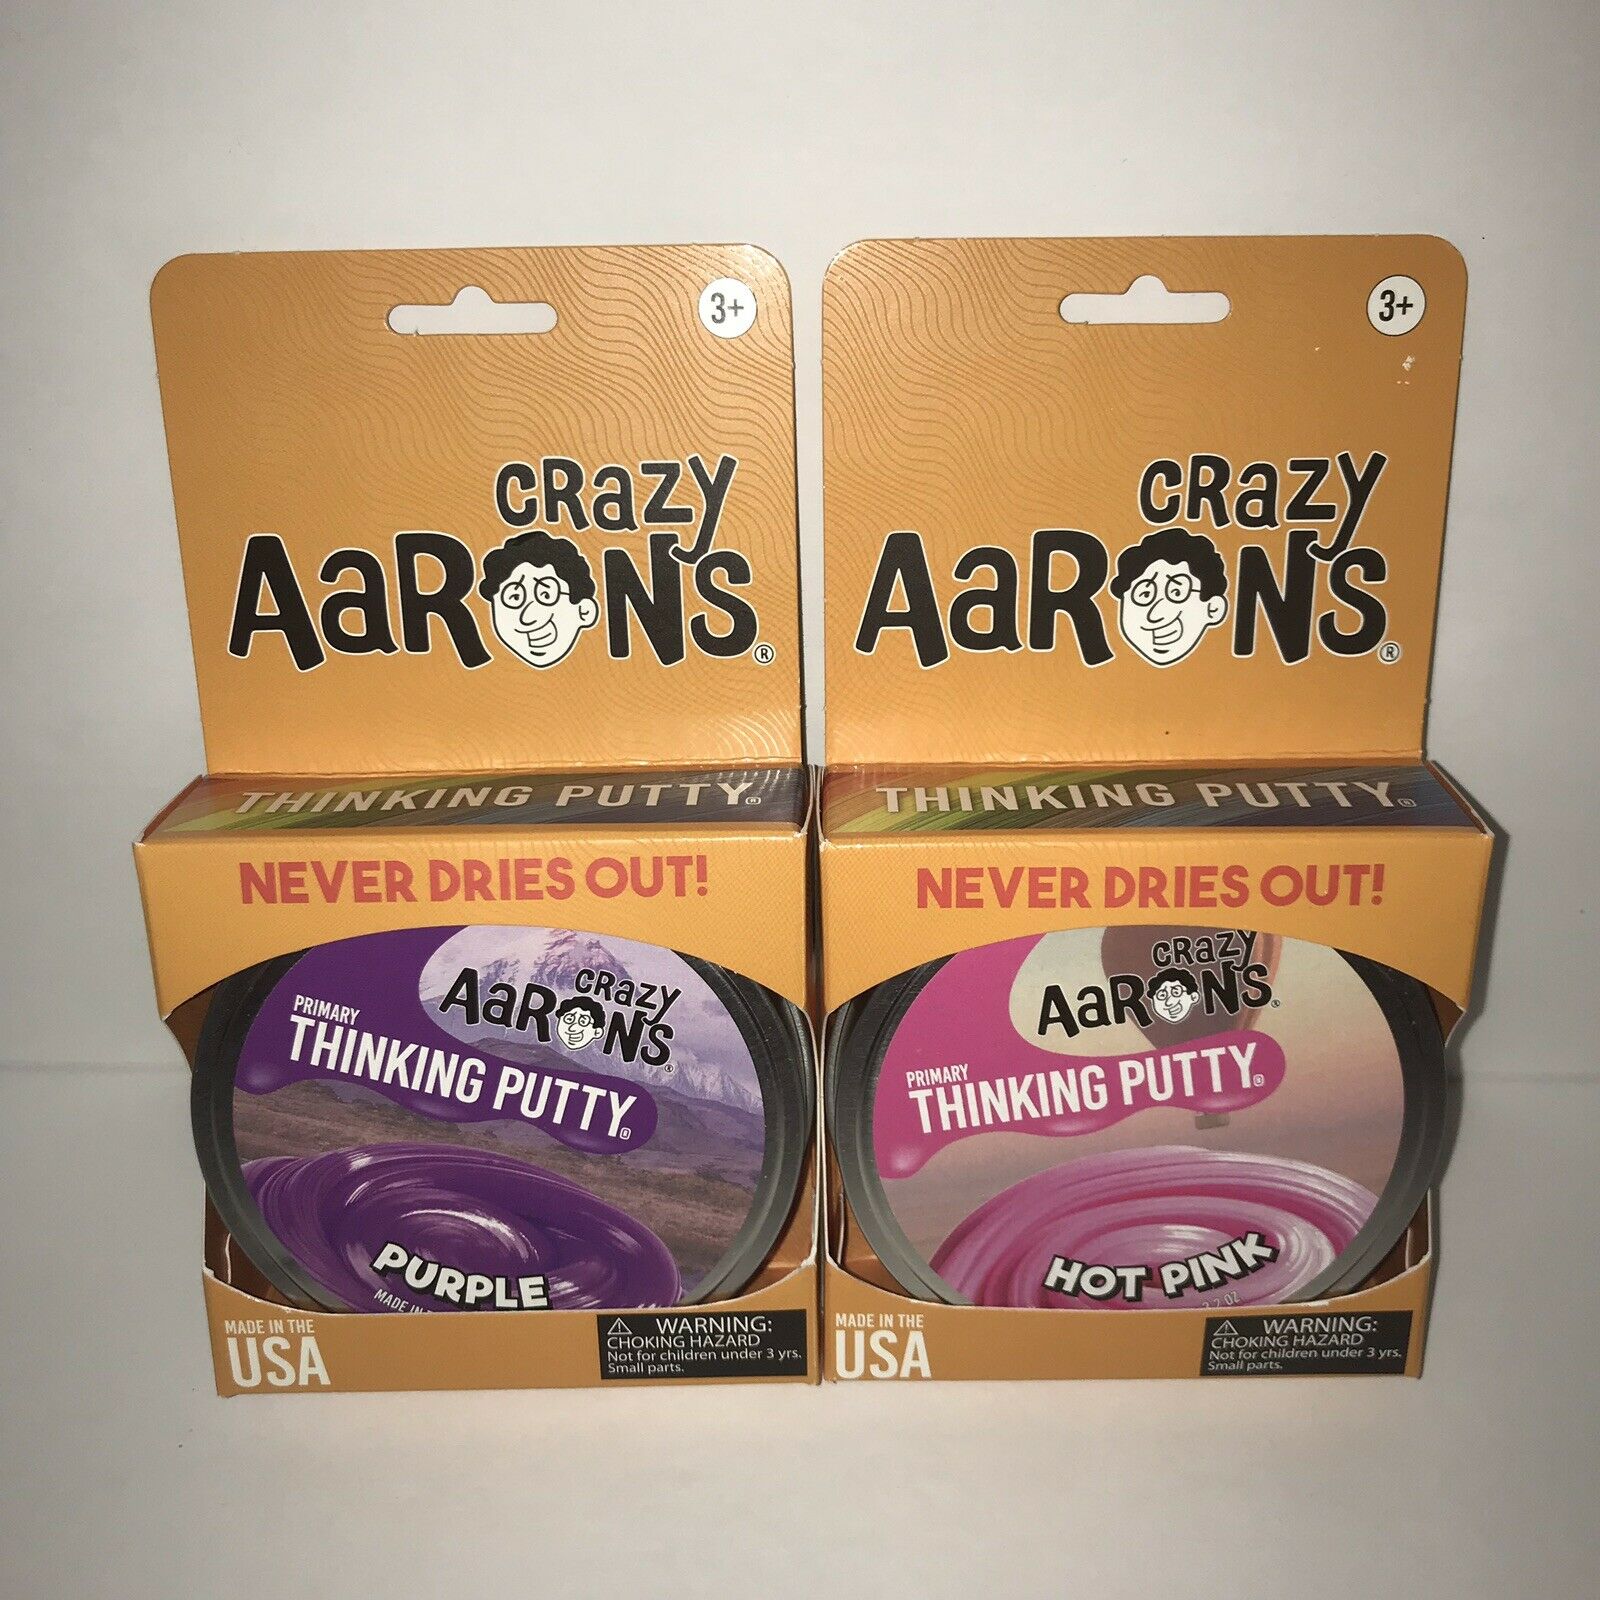 New Crazy Aaron’s Primary Thinking Putty Lot Of 2 Purple & Pink 3.2 Oz Tins